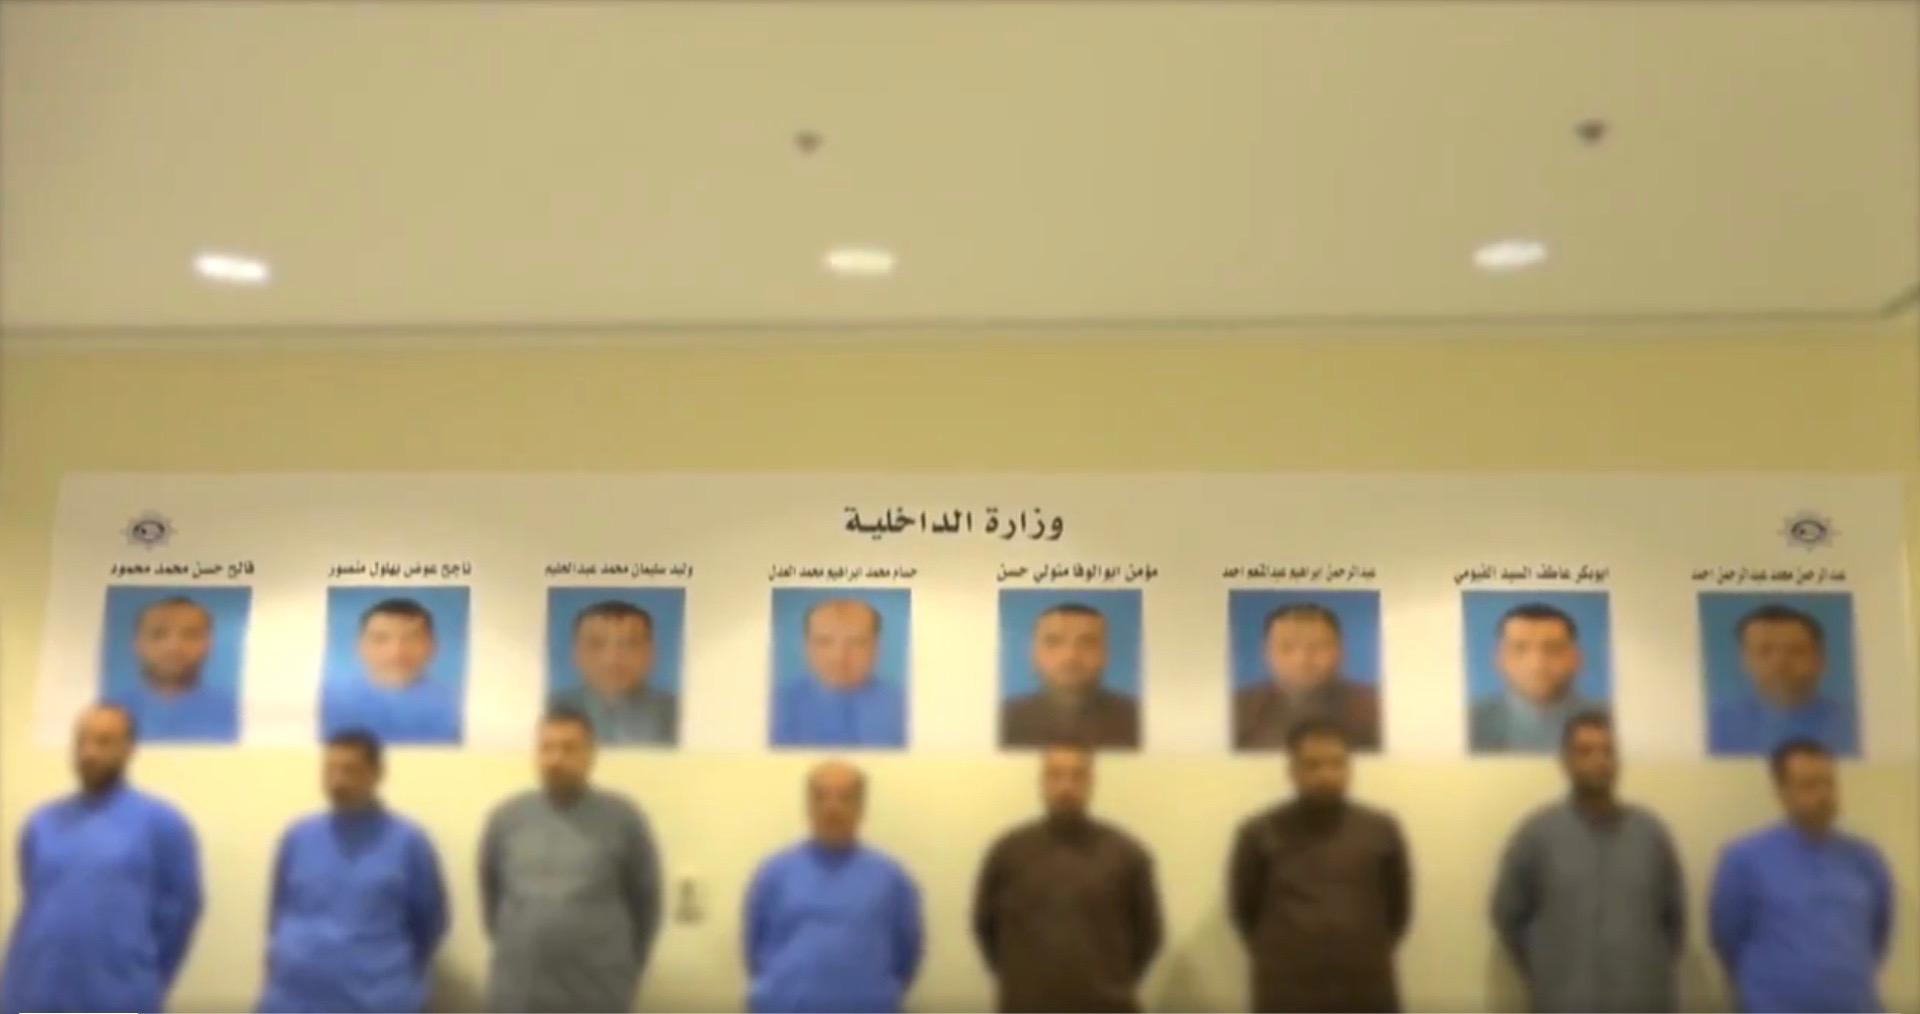 Kuwait’s Interior Ministry released a video statement on July 12 alleging the eight Egyptians were sought for criminal offenses in Egypt. Video originally published on Kuwait’s Interior Ministry YouTube Page.